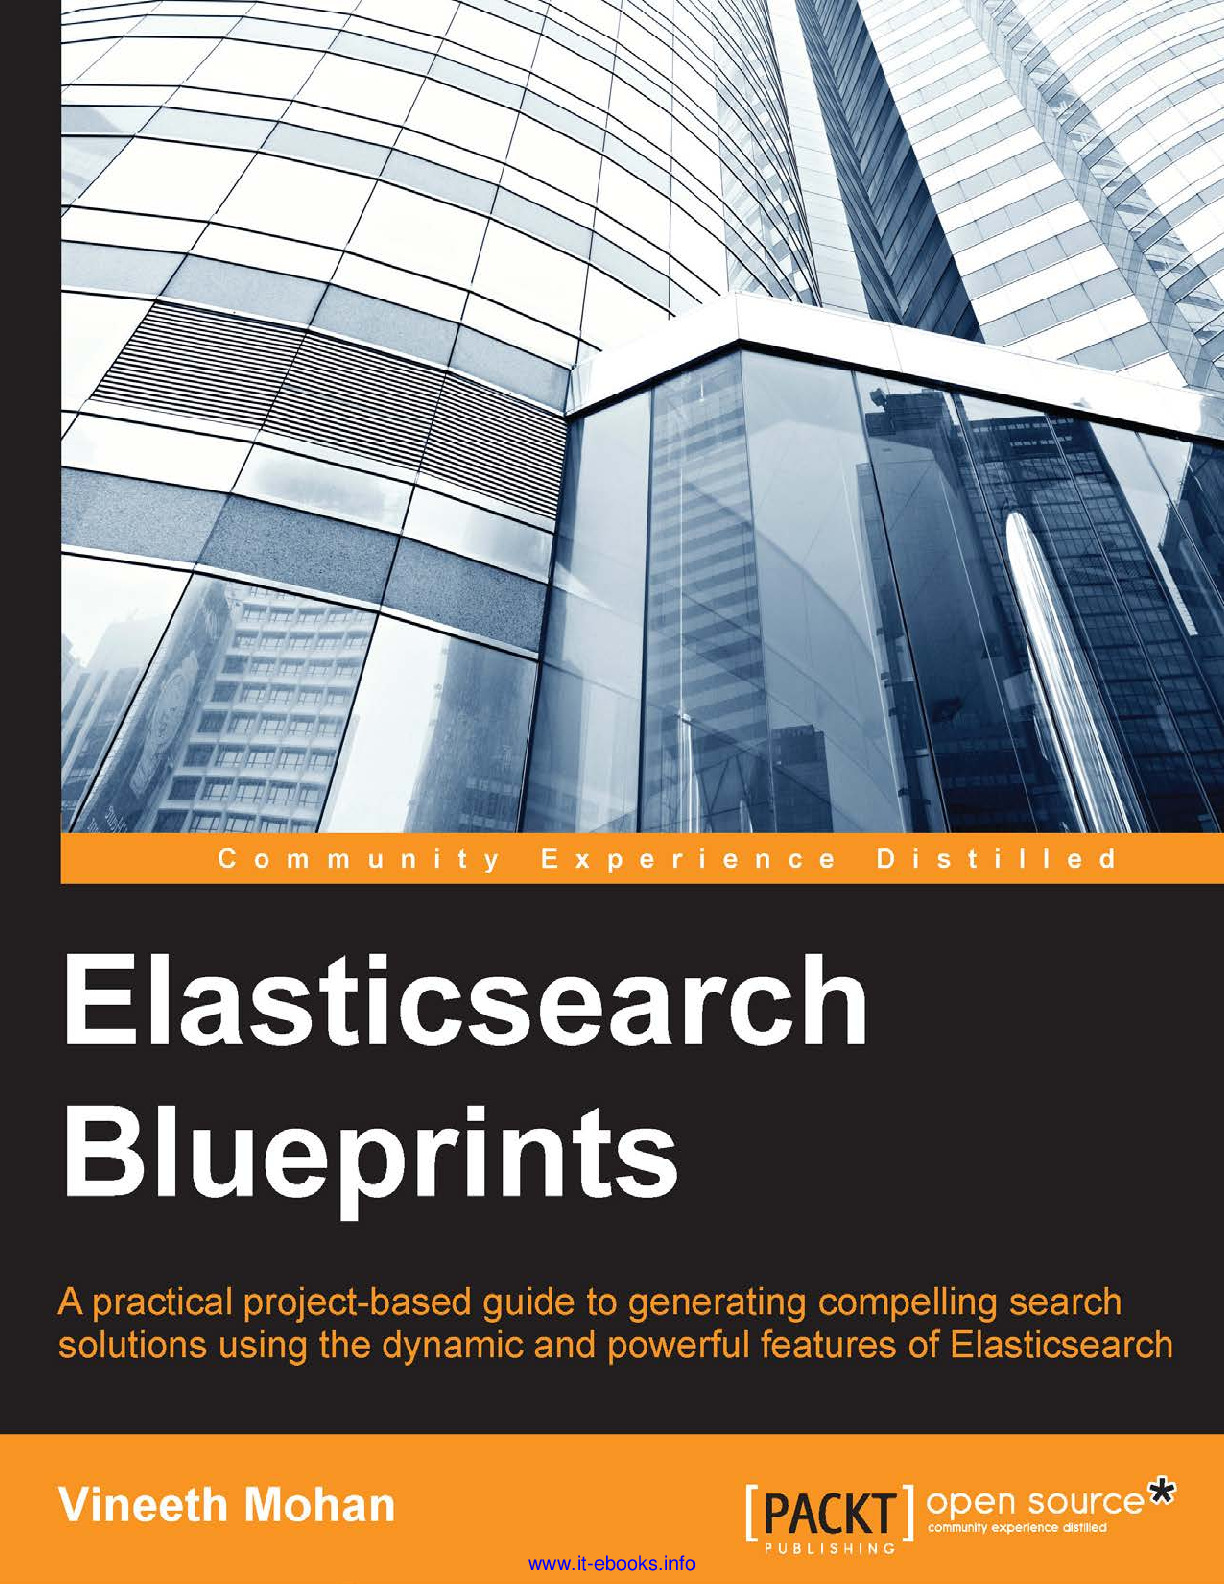 Elasticsearch Blueprints – A practical project-based guide to generating compelling search solutions using the dynamic and powerful features of Elasticsearch